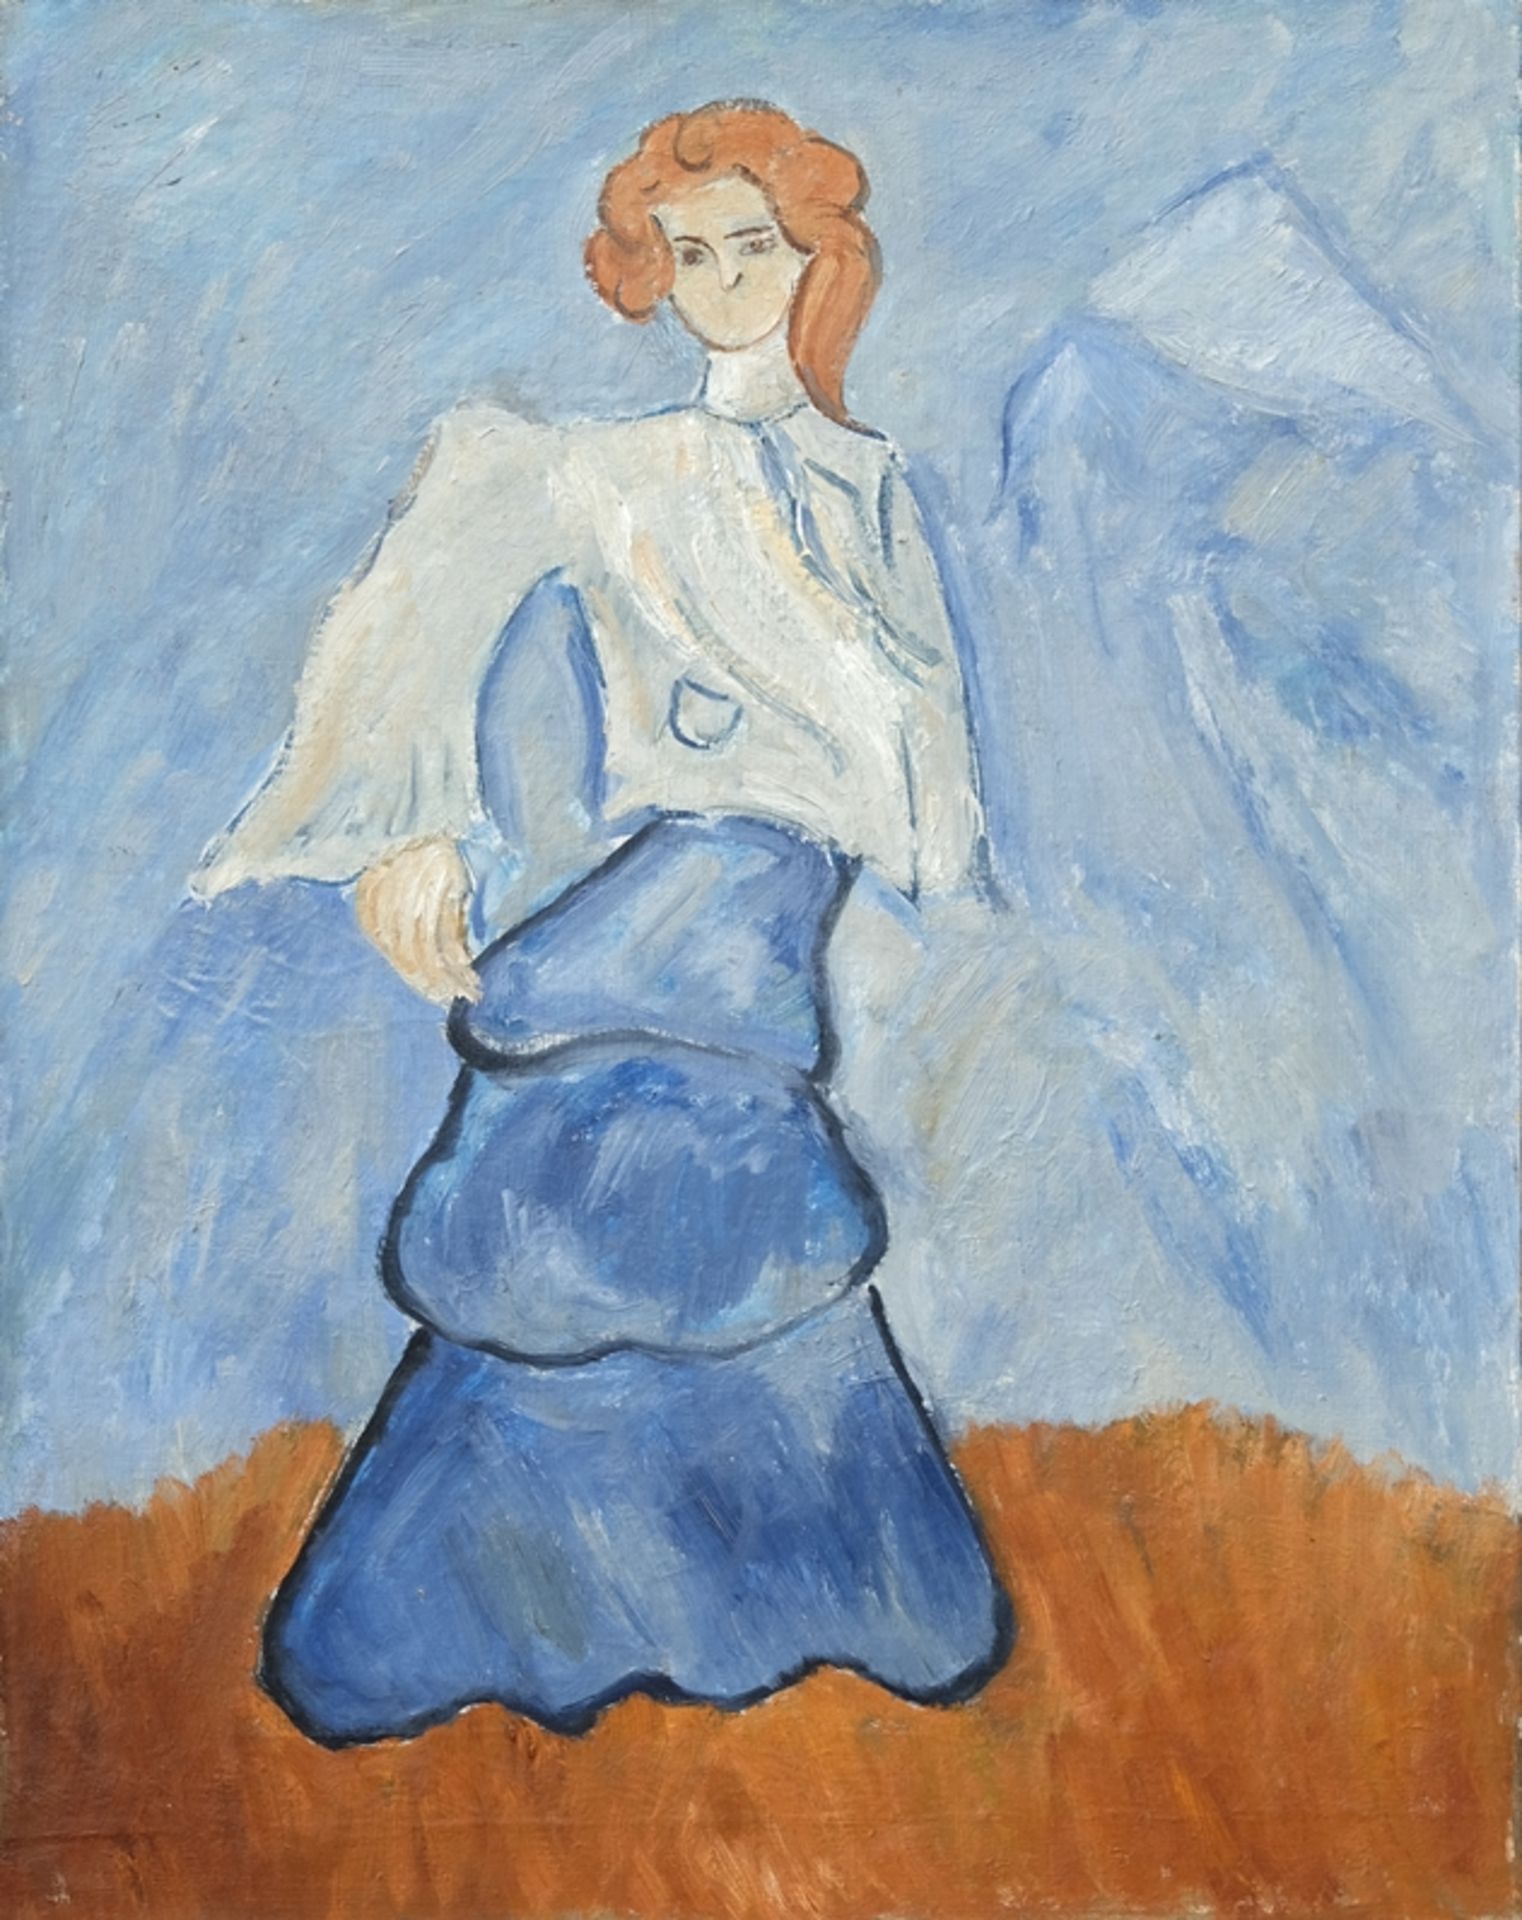 Copist (mid-20th century) Dressy Woman, in the style of Mikhaïl Larionov (1881-1964), probably 1950